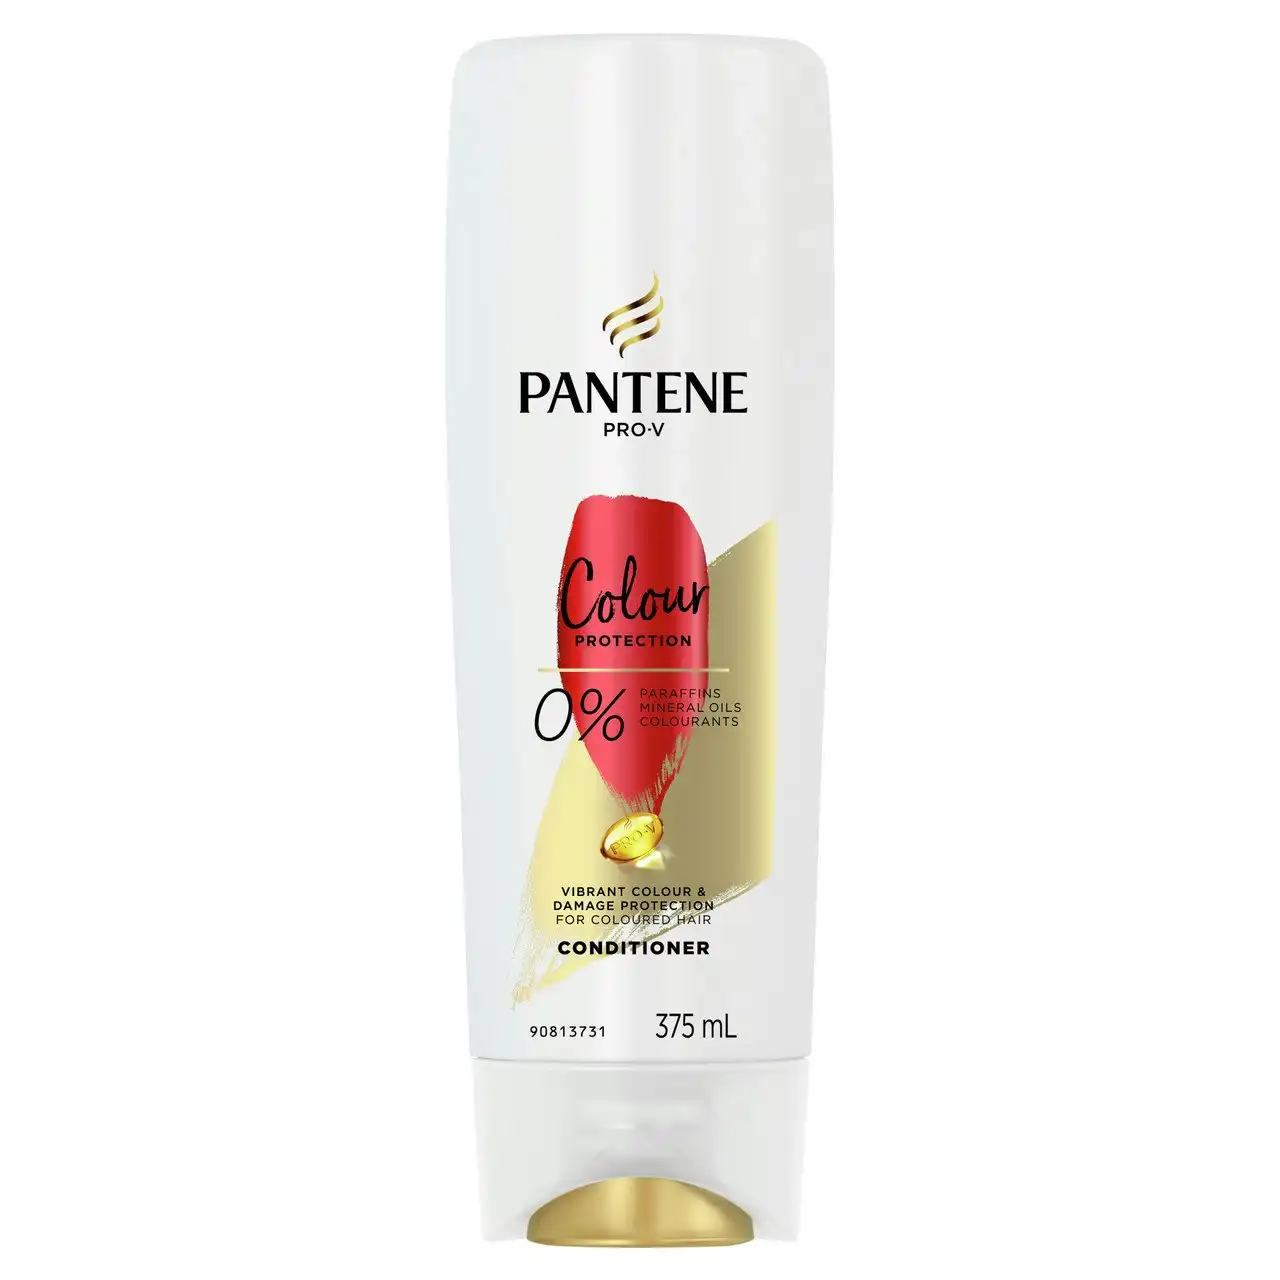 Pantene Pro-V Colour Protection Conditioner: Conditioner for Coloured Hair 375 ml